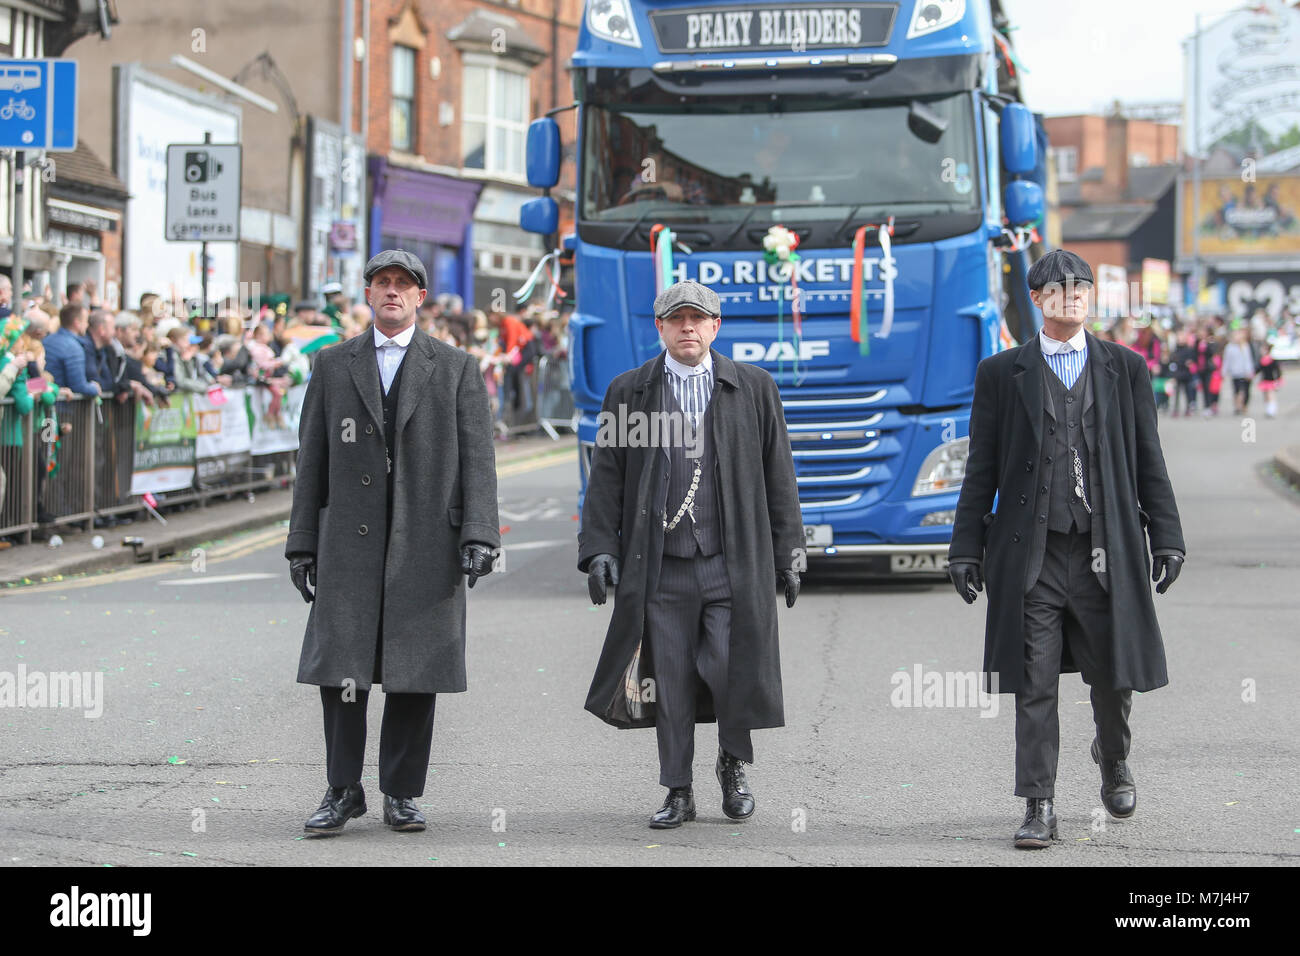 Birmingham's Irish community celebrates St Patrick's Day with their annual parade through the city's streets. The city's parade is the third biggest in the world, behind only New York and Dublin. The acclaimed TV programme Peaky Blinders makes an appearance. Stock Photo